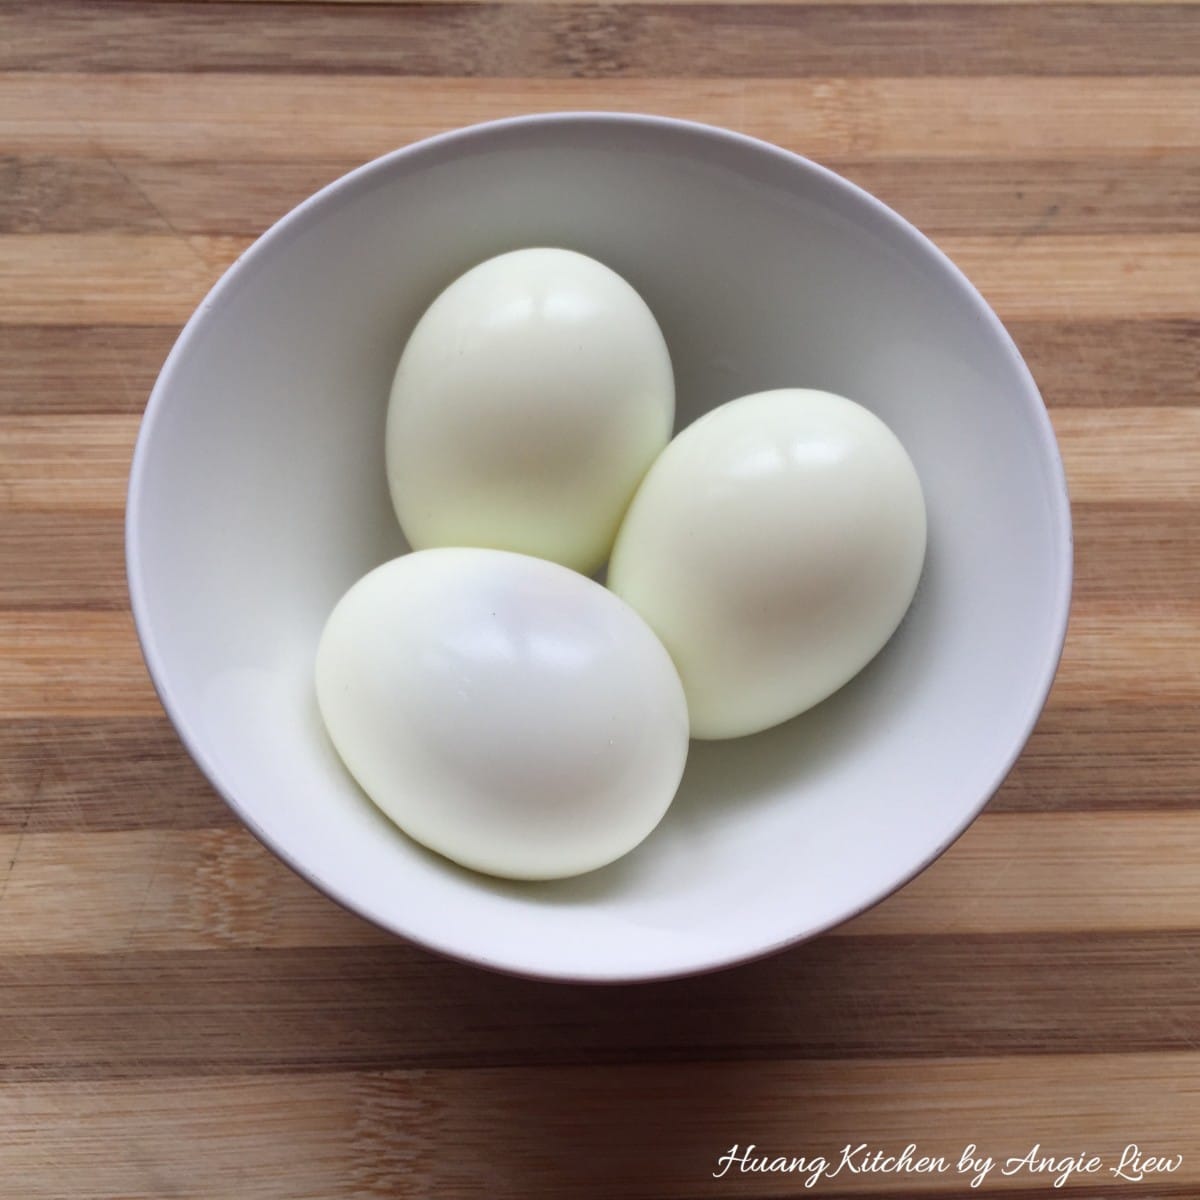 Hard-boiled eggs and shelled.